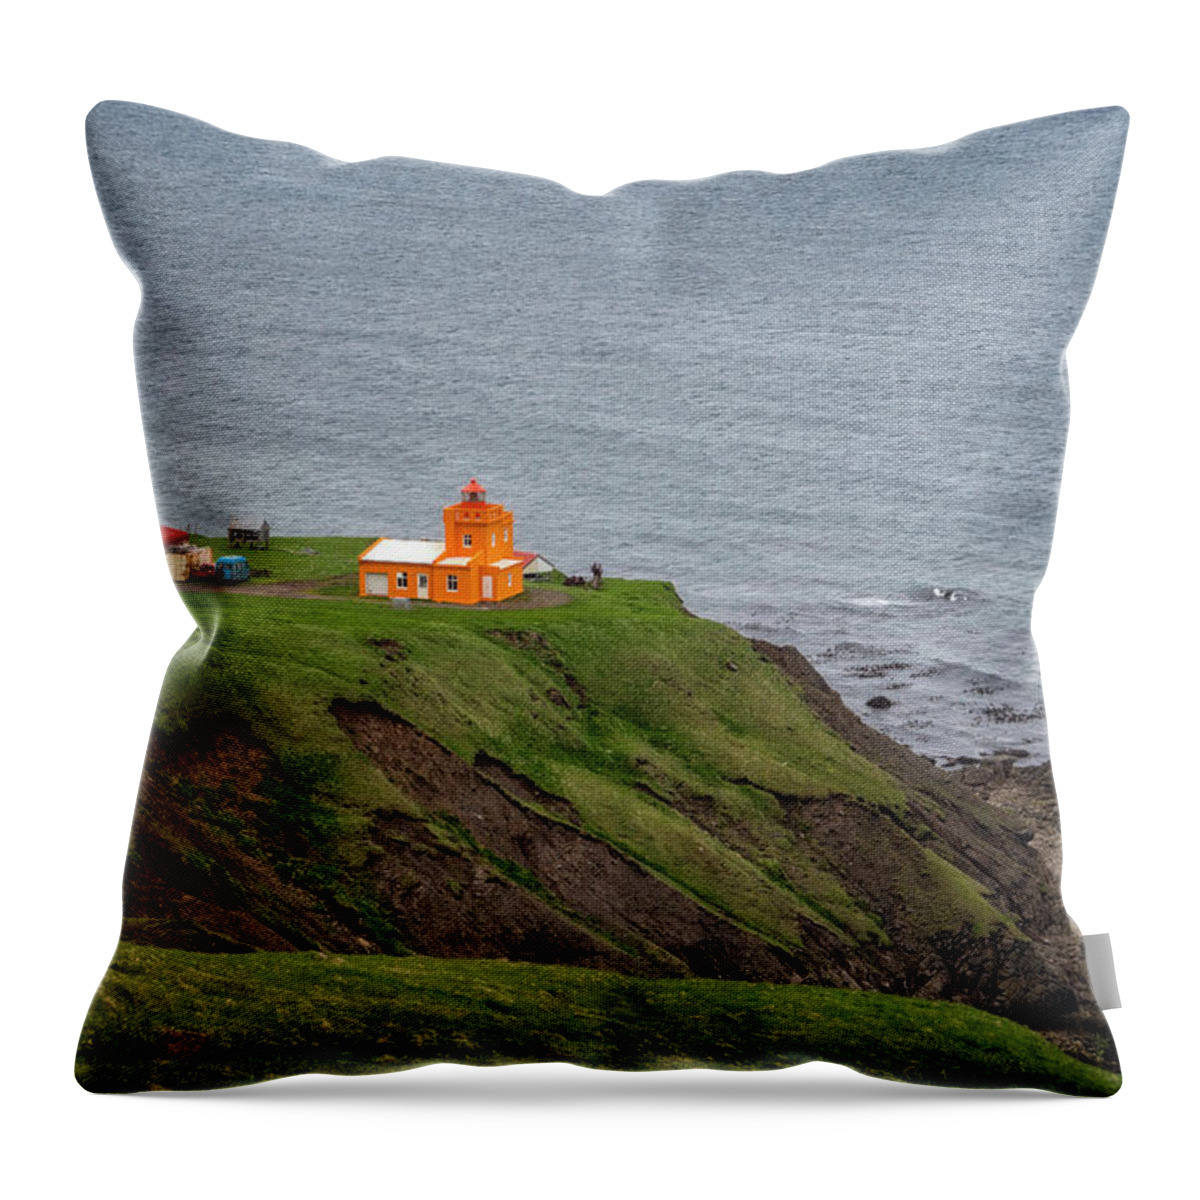 Iceland Throw Pillow featuring the photograph Orange Lighthouse by Tom Singleton